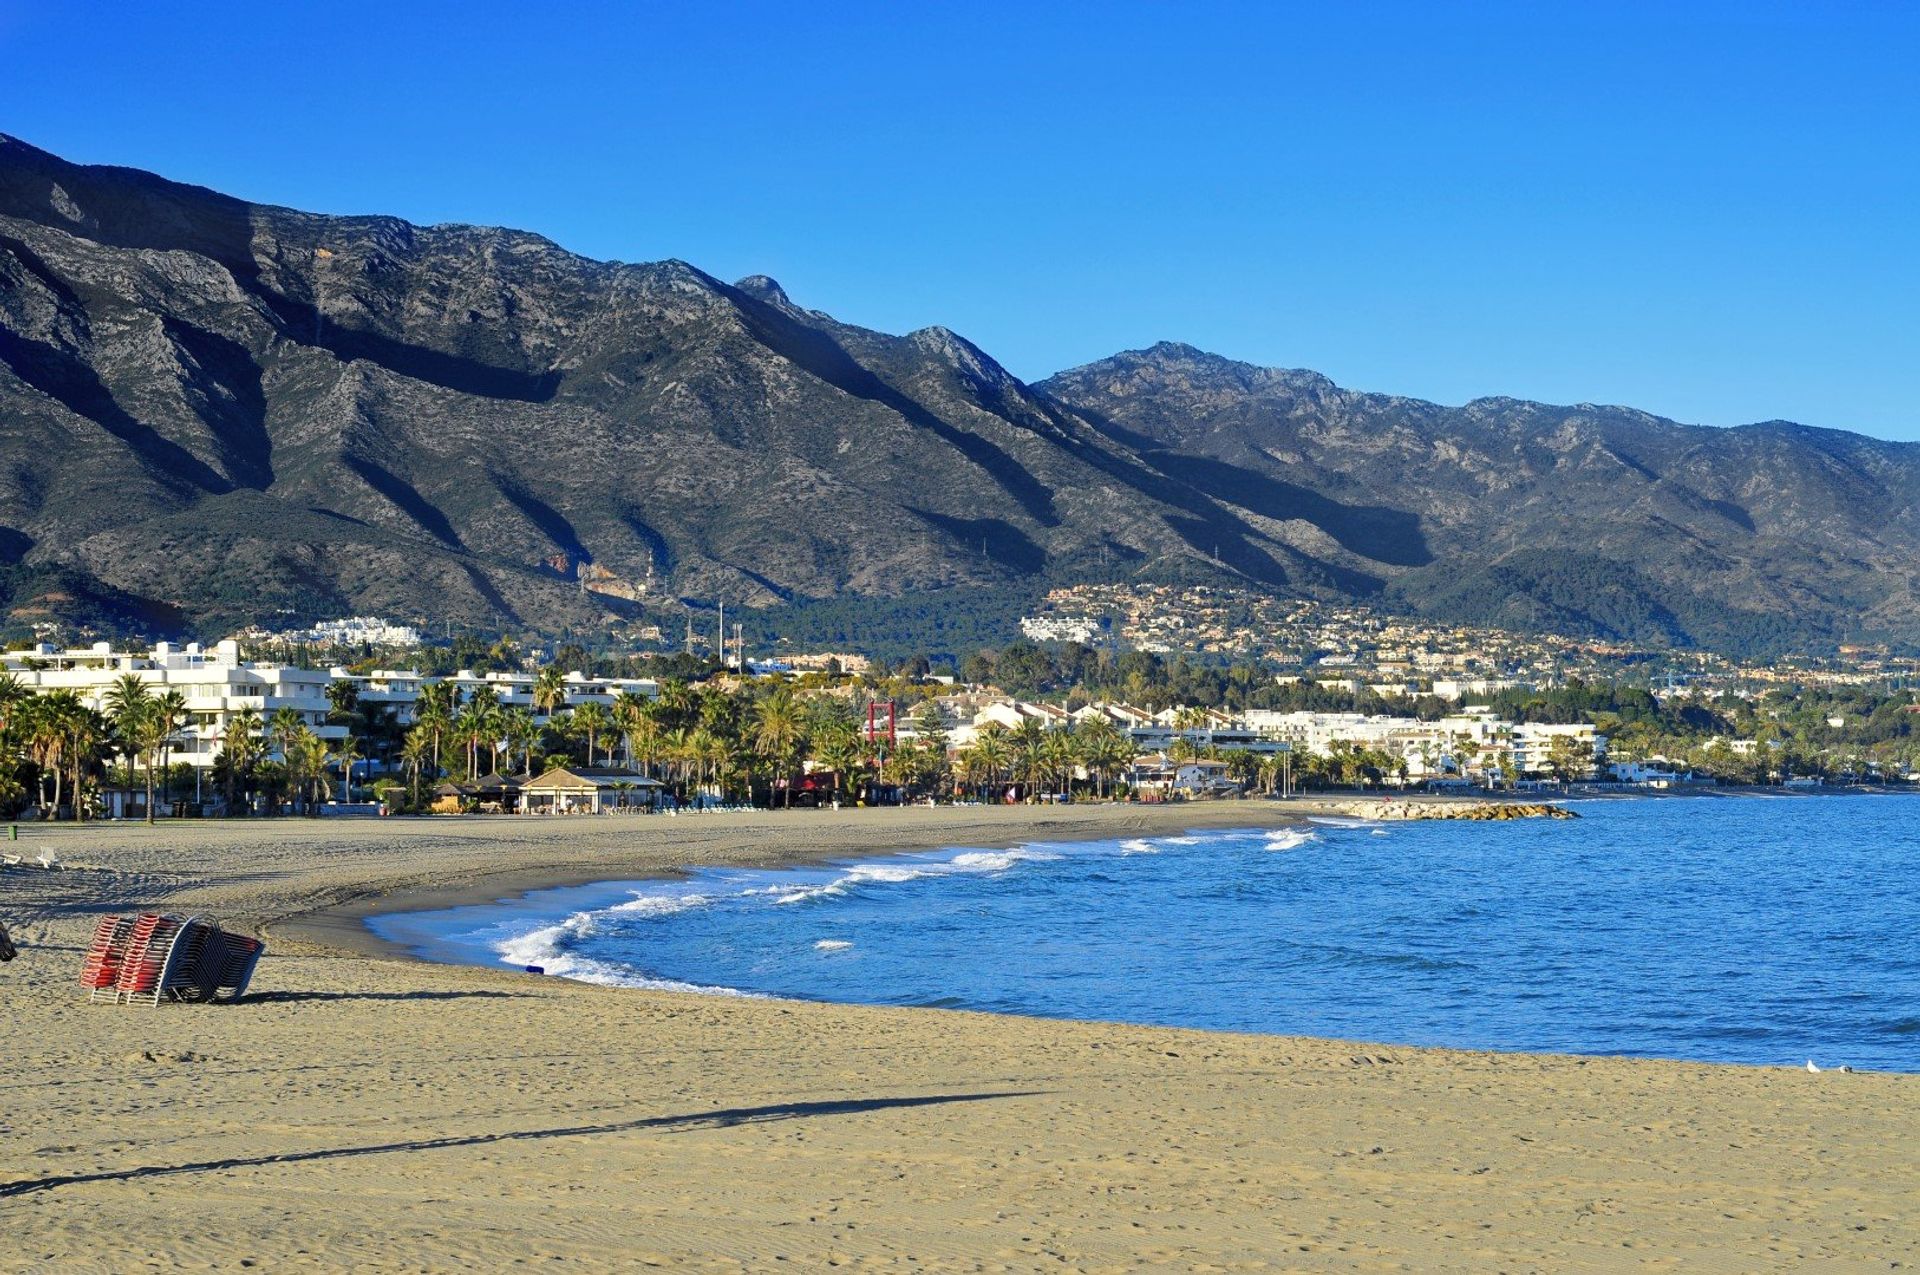 Nueva Andalucia beach to the west of Puerto Banus is ideal for a tranquil family day out by the coast